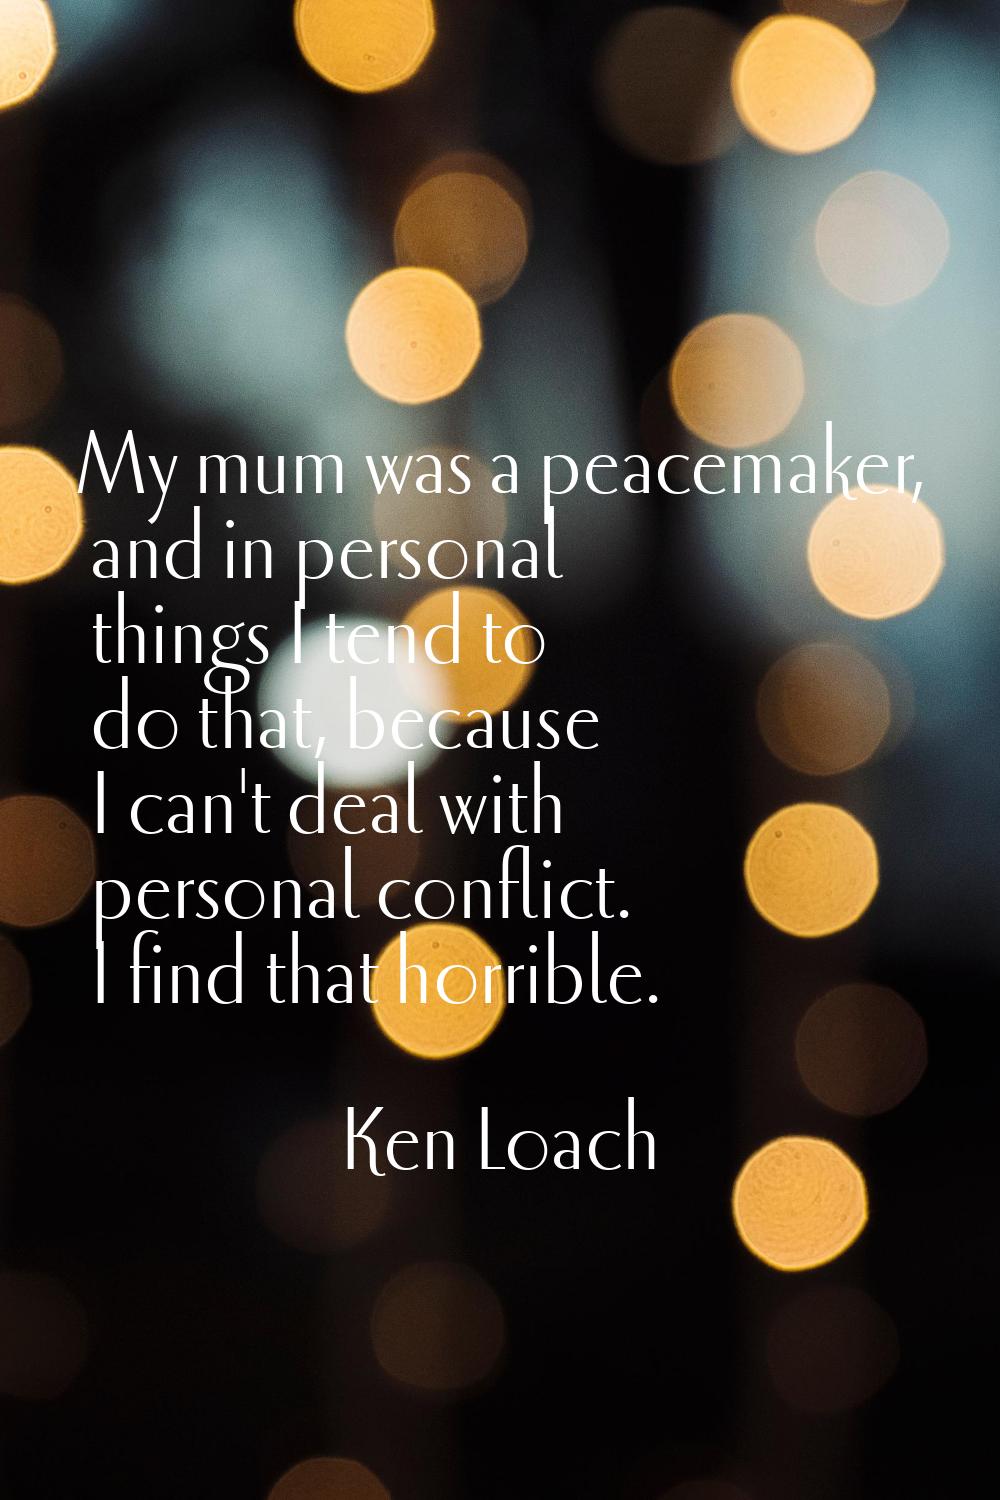 My mum was a peacemaker, and in personal things I tend to do that, because I can't deal with person